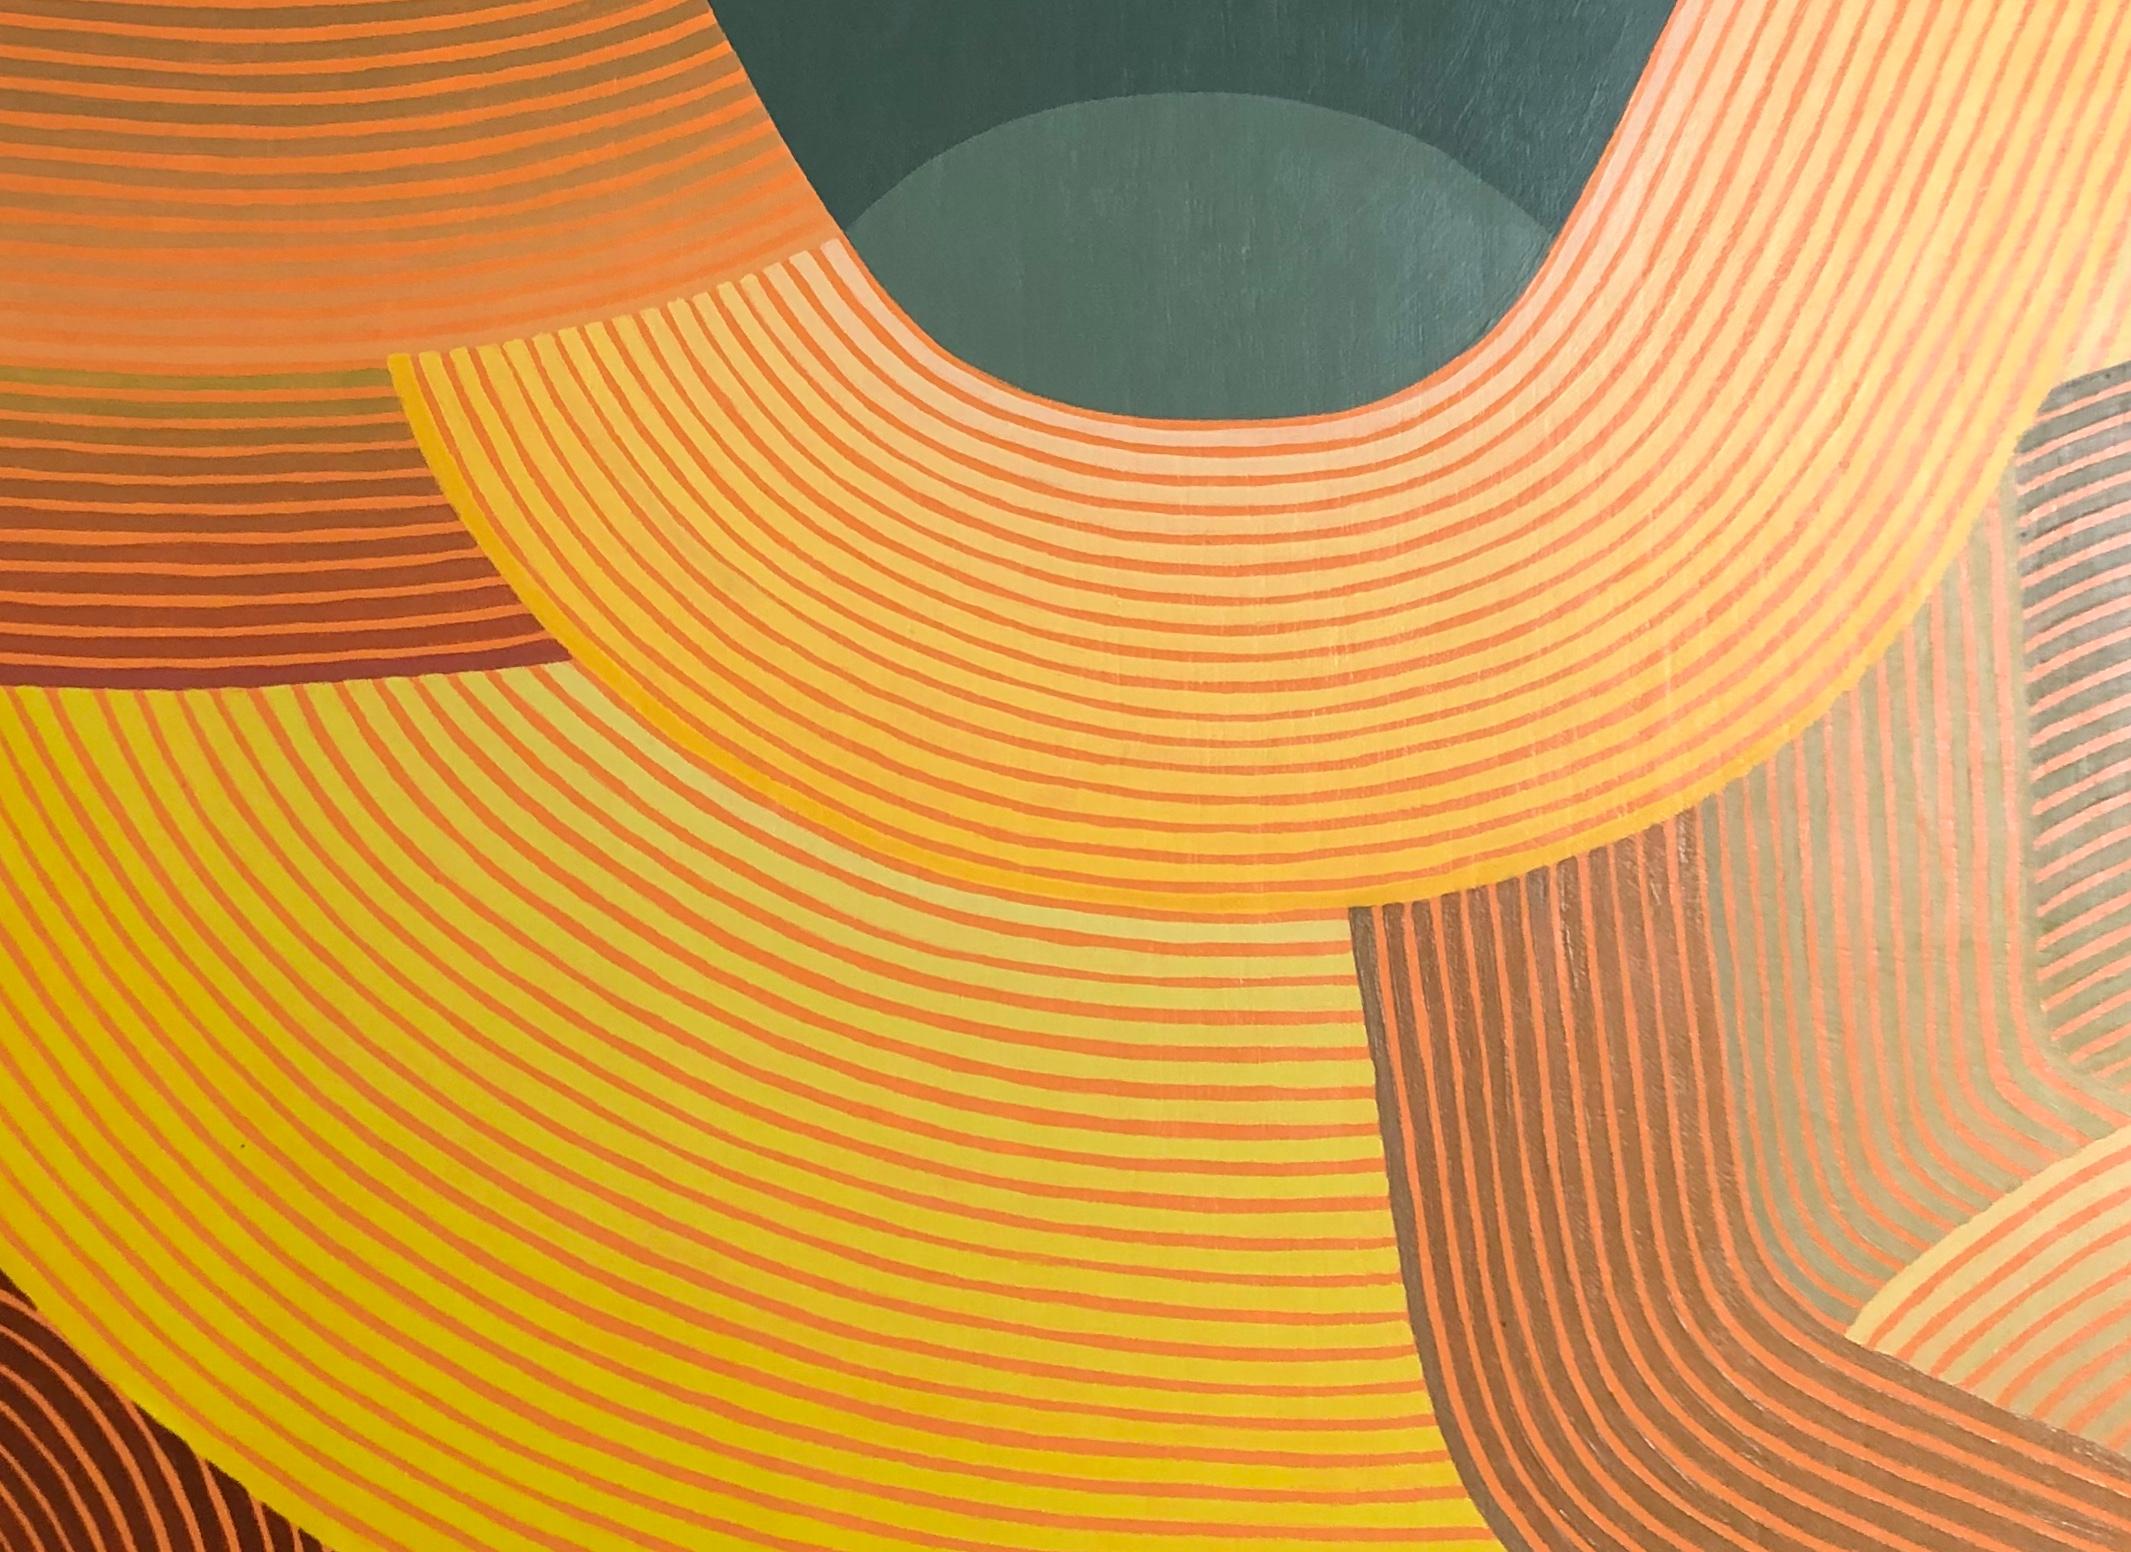 Downside, Vertical Abstract Geometric Painting with Peach, Yellow, Coral, Teal - Orange Abstract Painting by Jenny Kemp